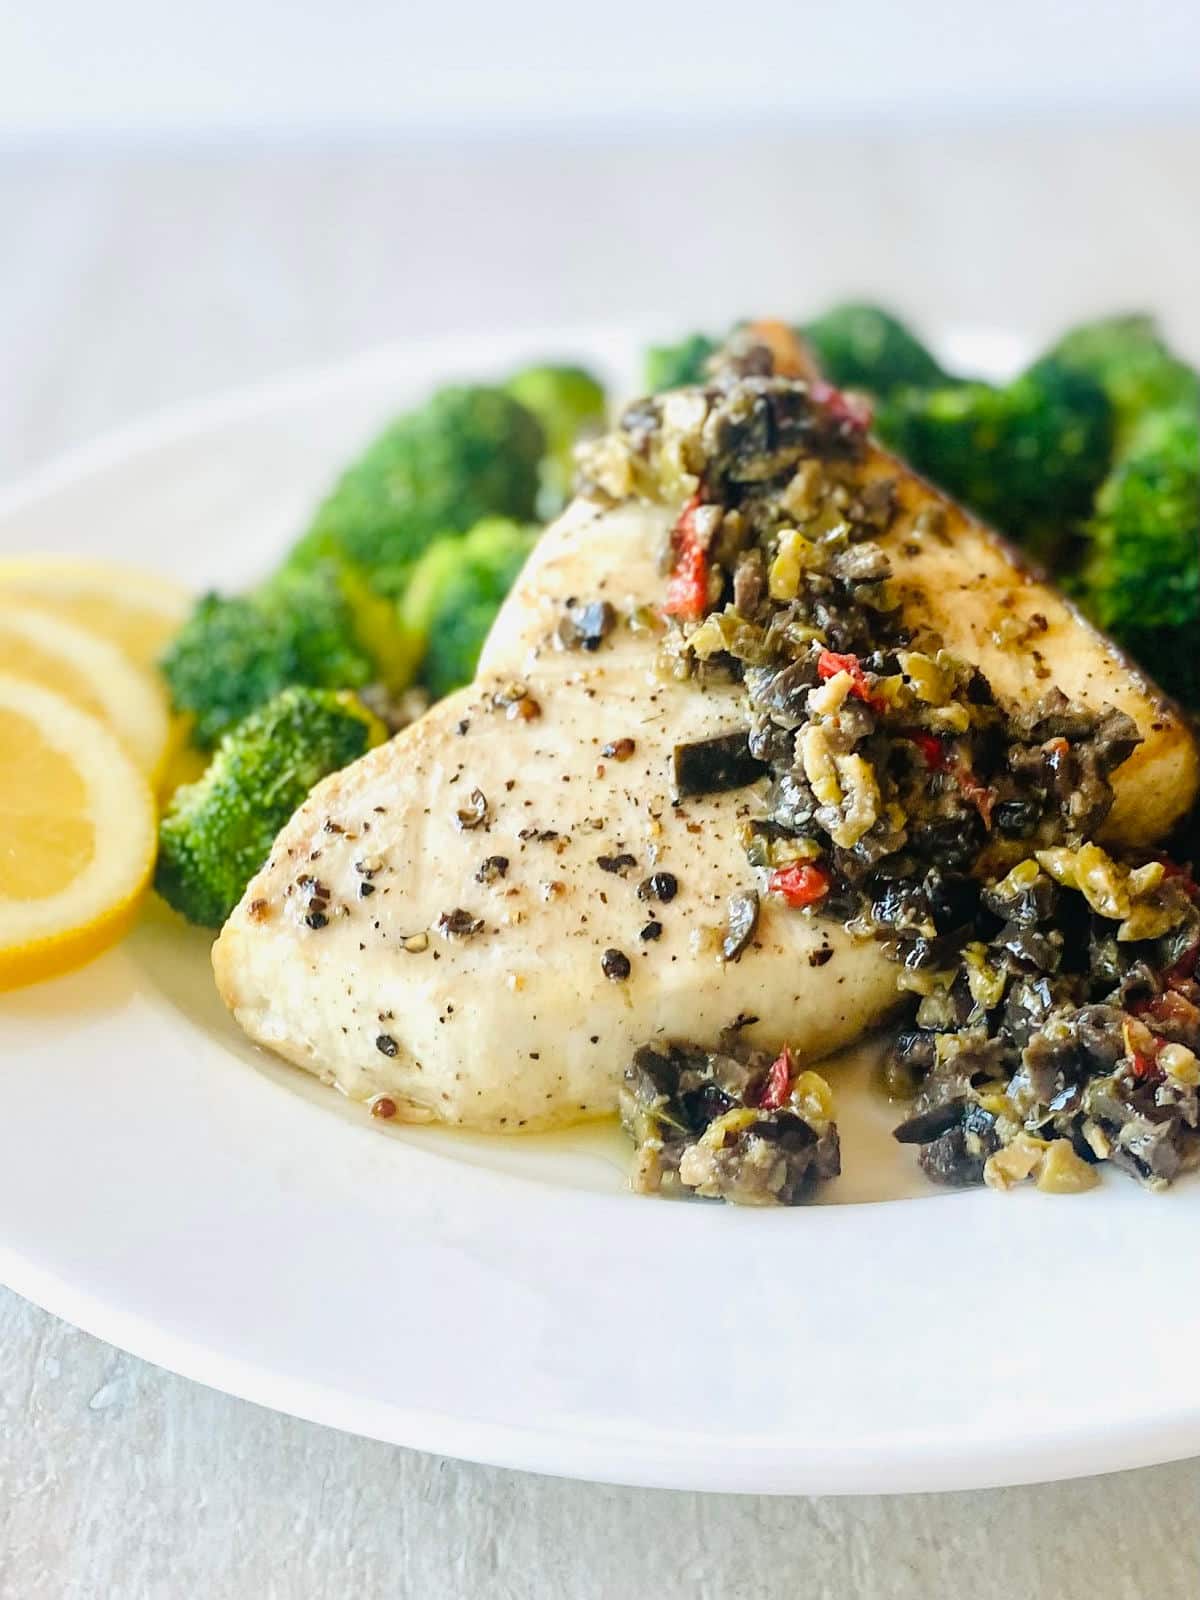 swordfish steak air fryer with broccoli and olive tapenade